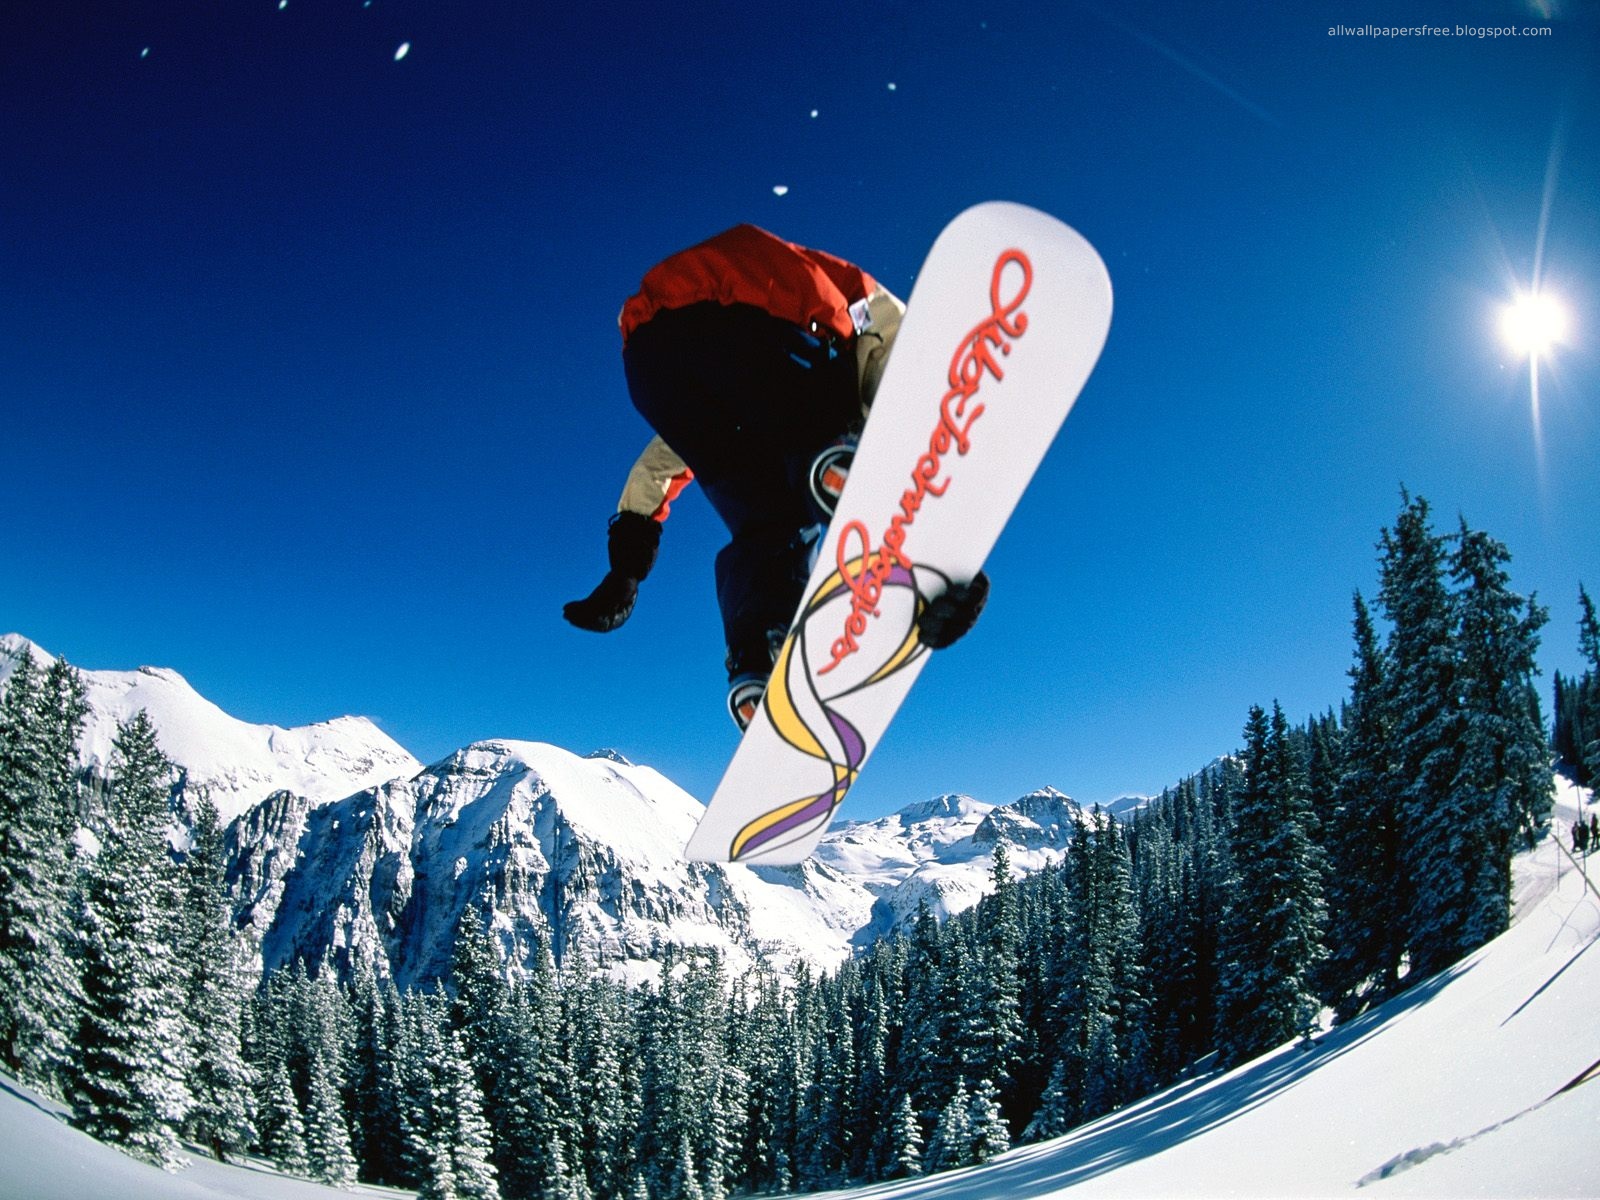 Download High quality Snowboarding wallpaper / Sports / 1600x1200